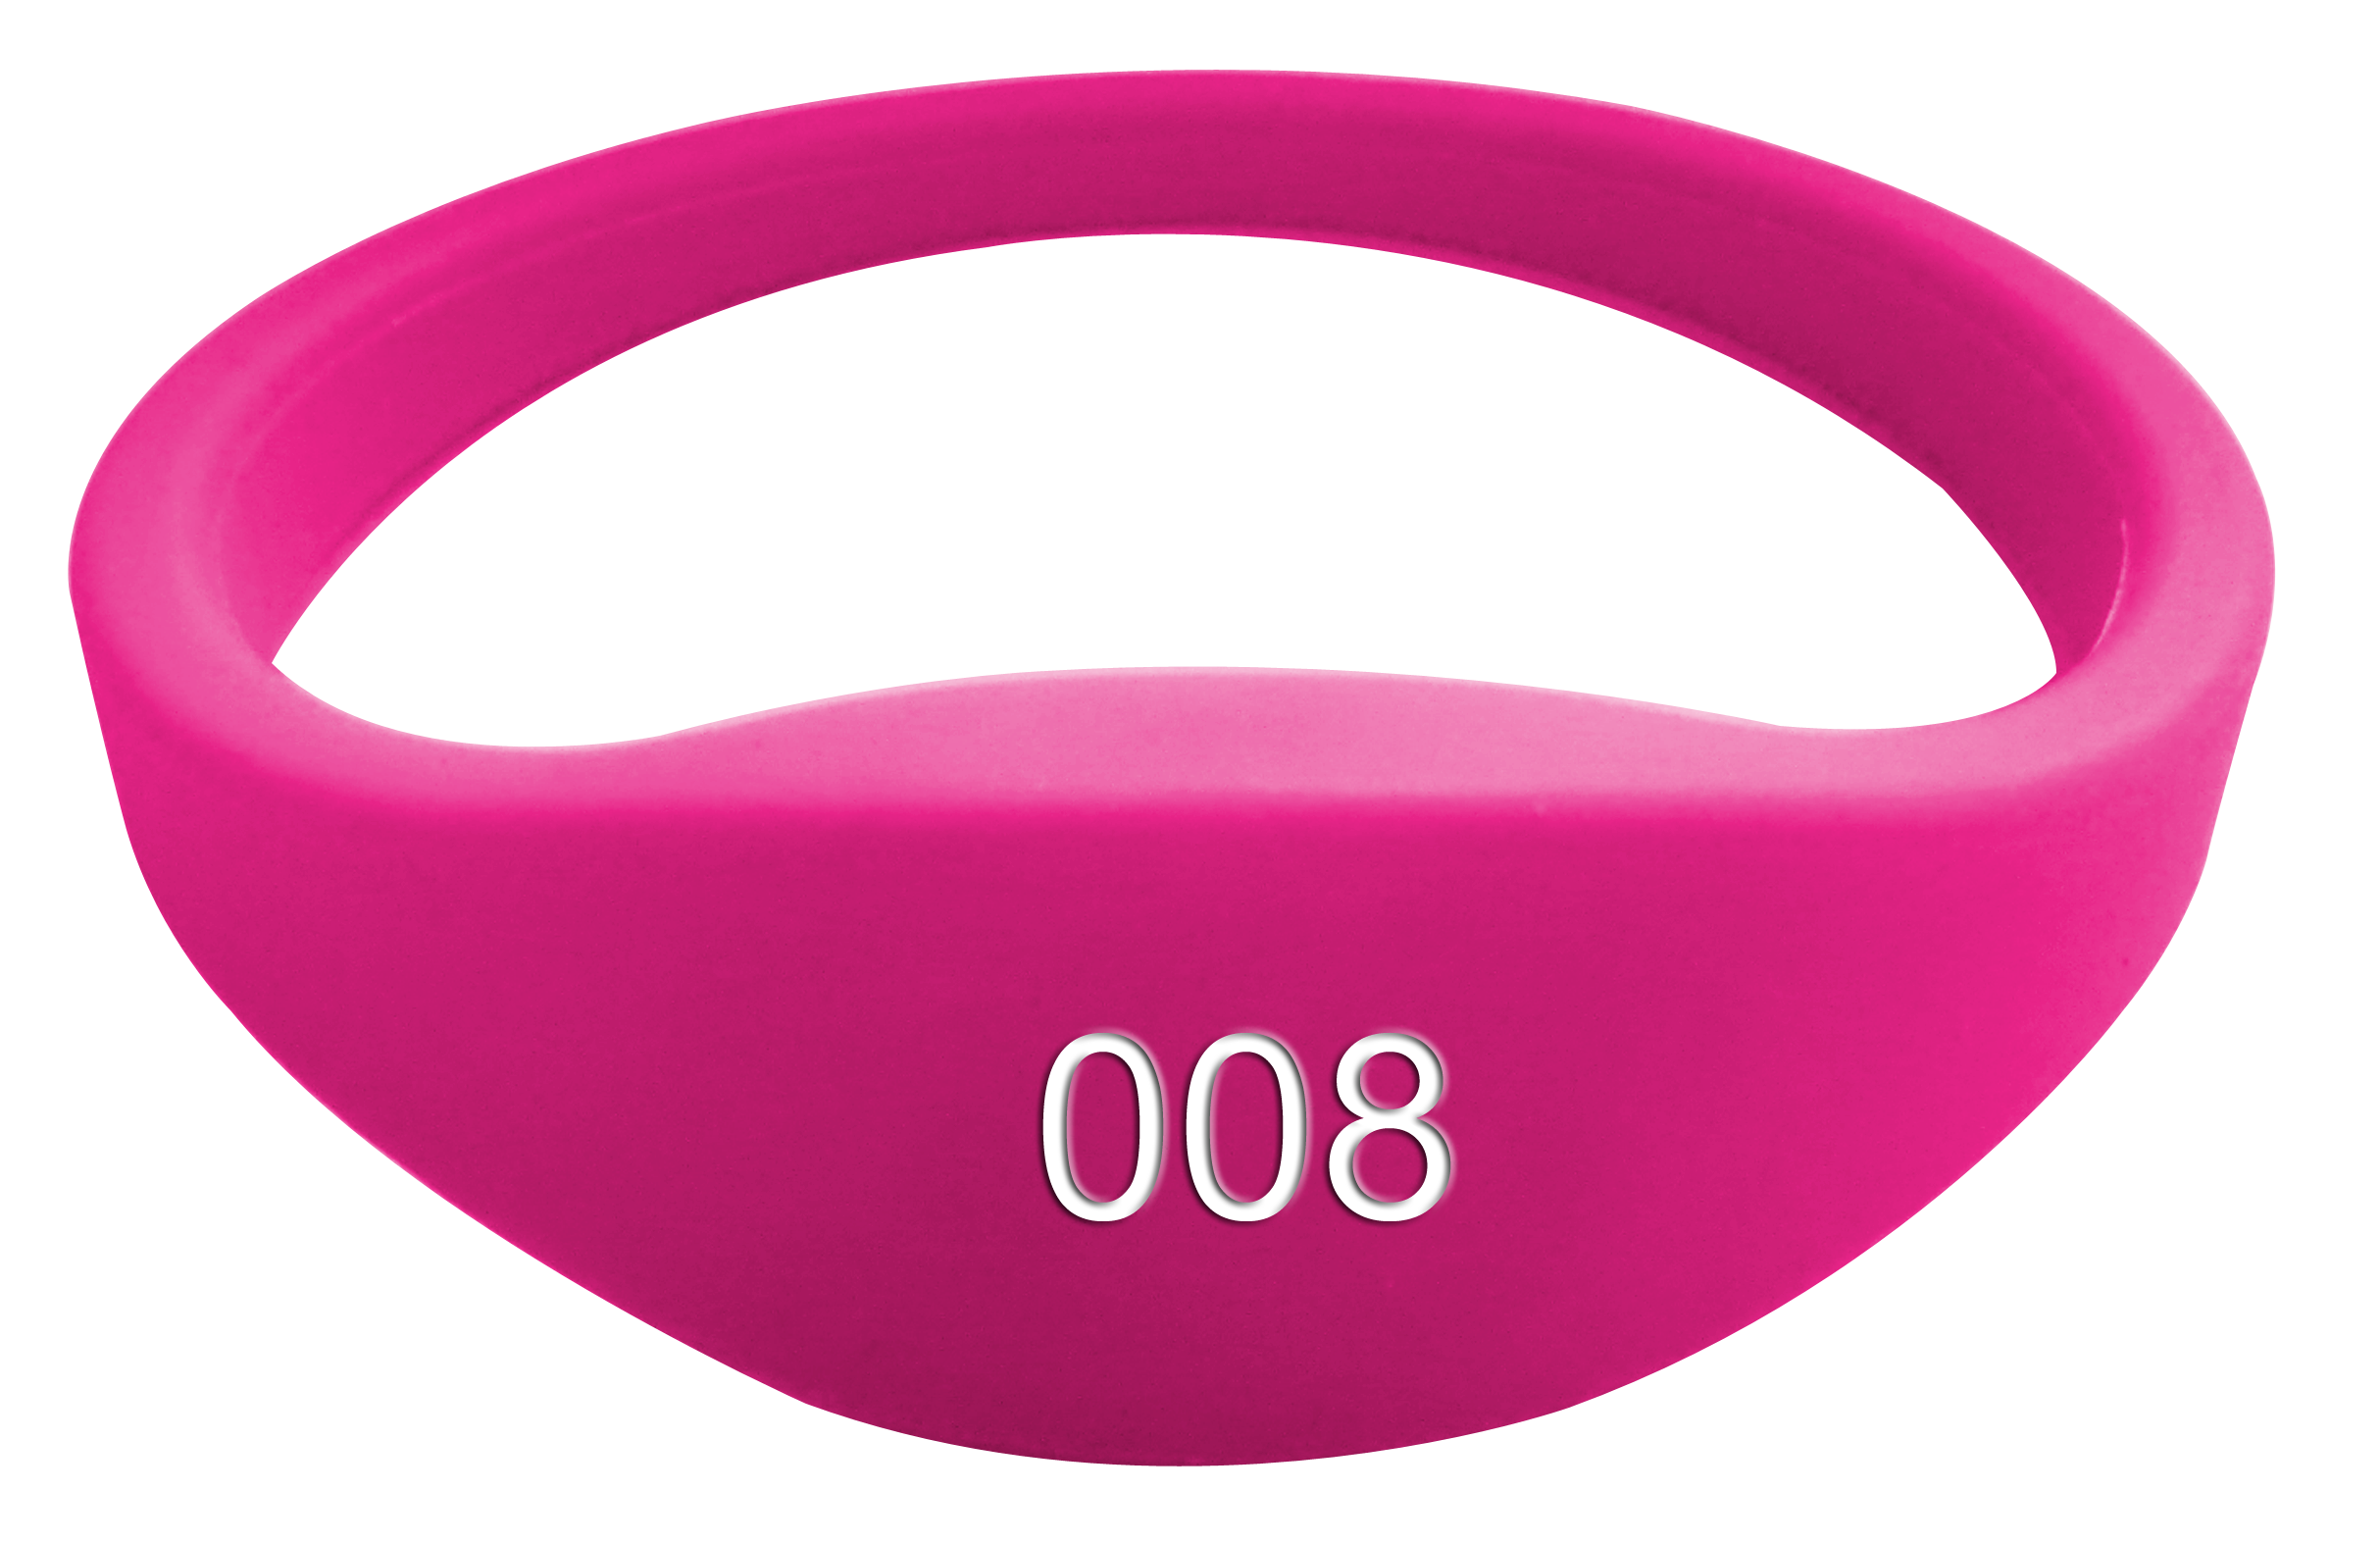 LF/HF 125khz/13.56mhz wrist band Color Waterproof Silicone Wristband Bracelet Tag SW615 RFID tags are widely used in extremely humid environments swimming pool, cooling libraries, water patrol, field operations